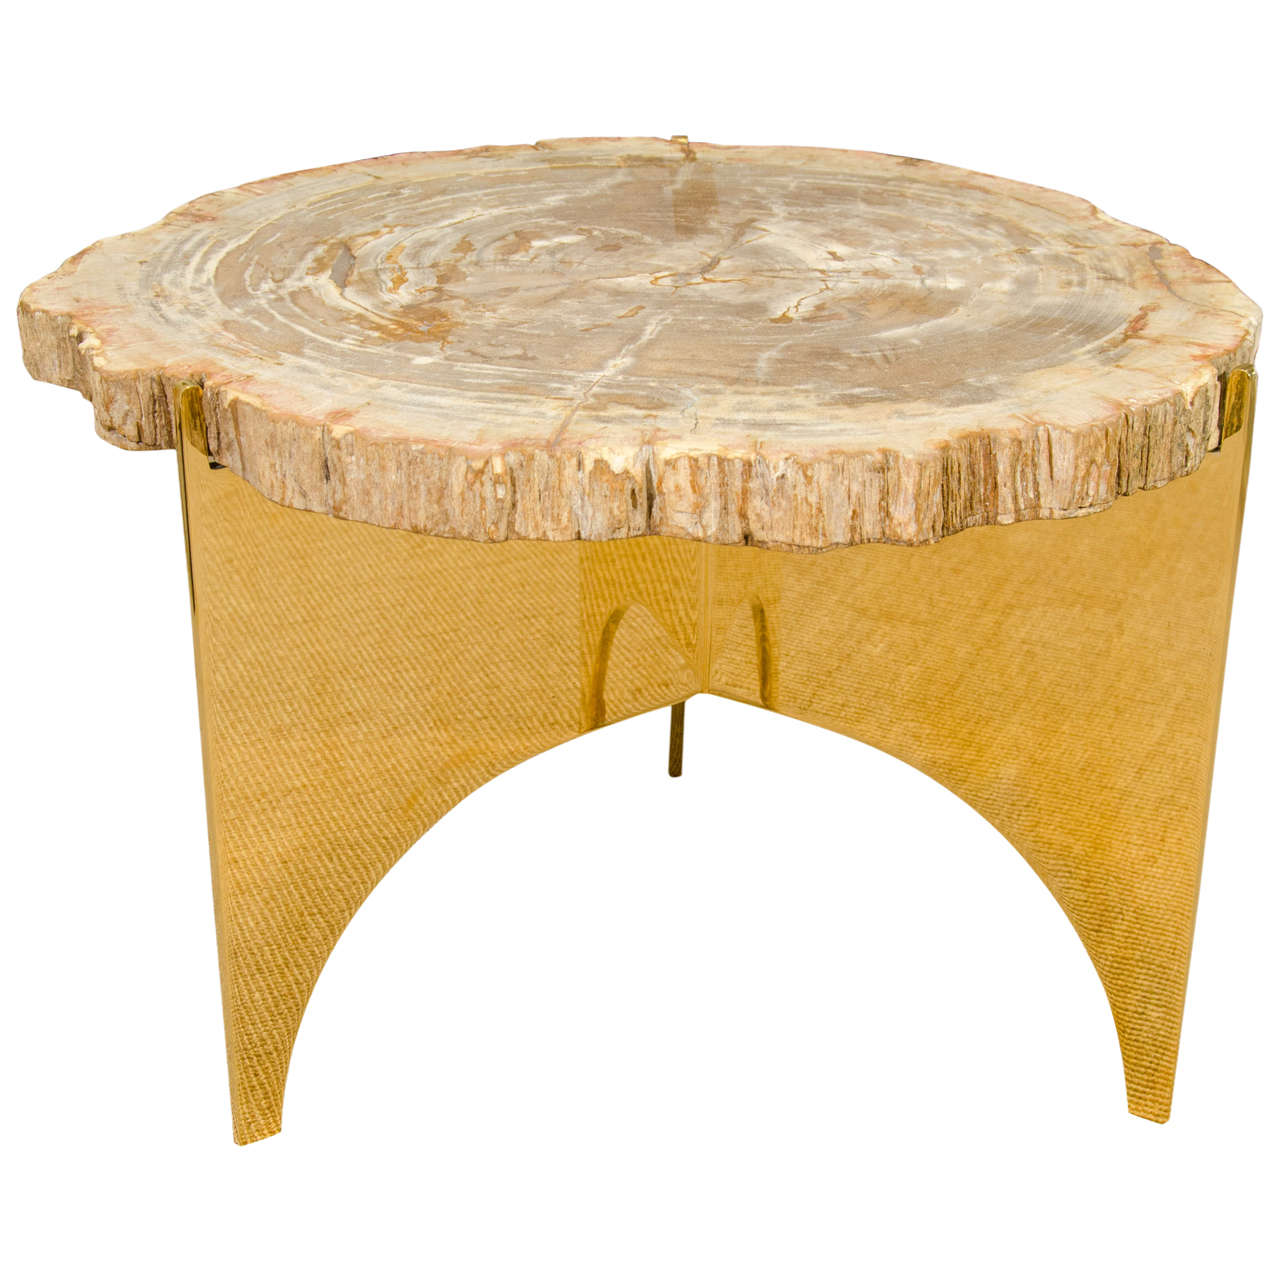 A Petrified Wood and Bronze Occasional Table